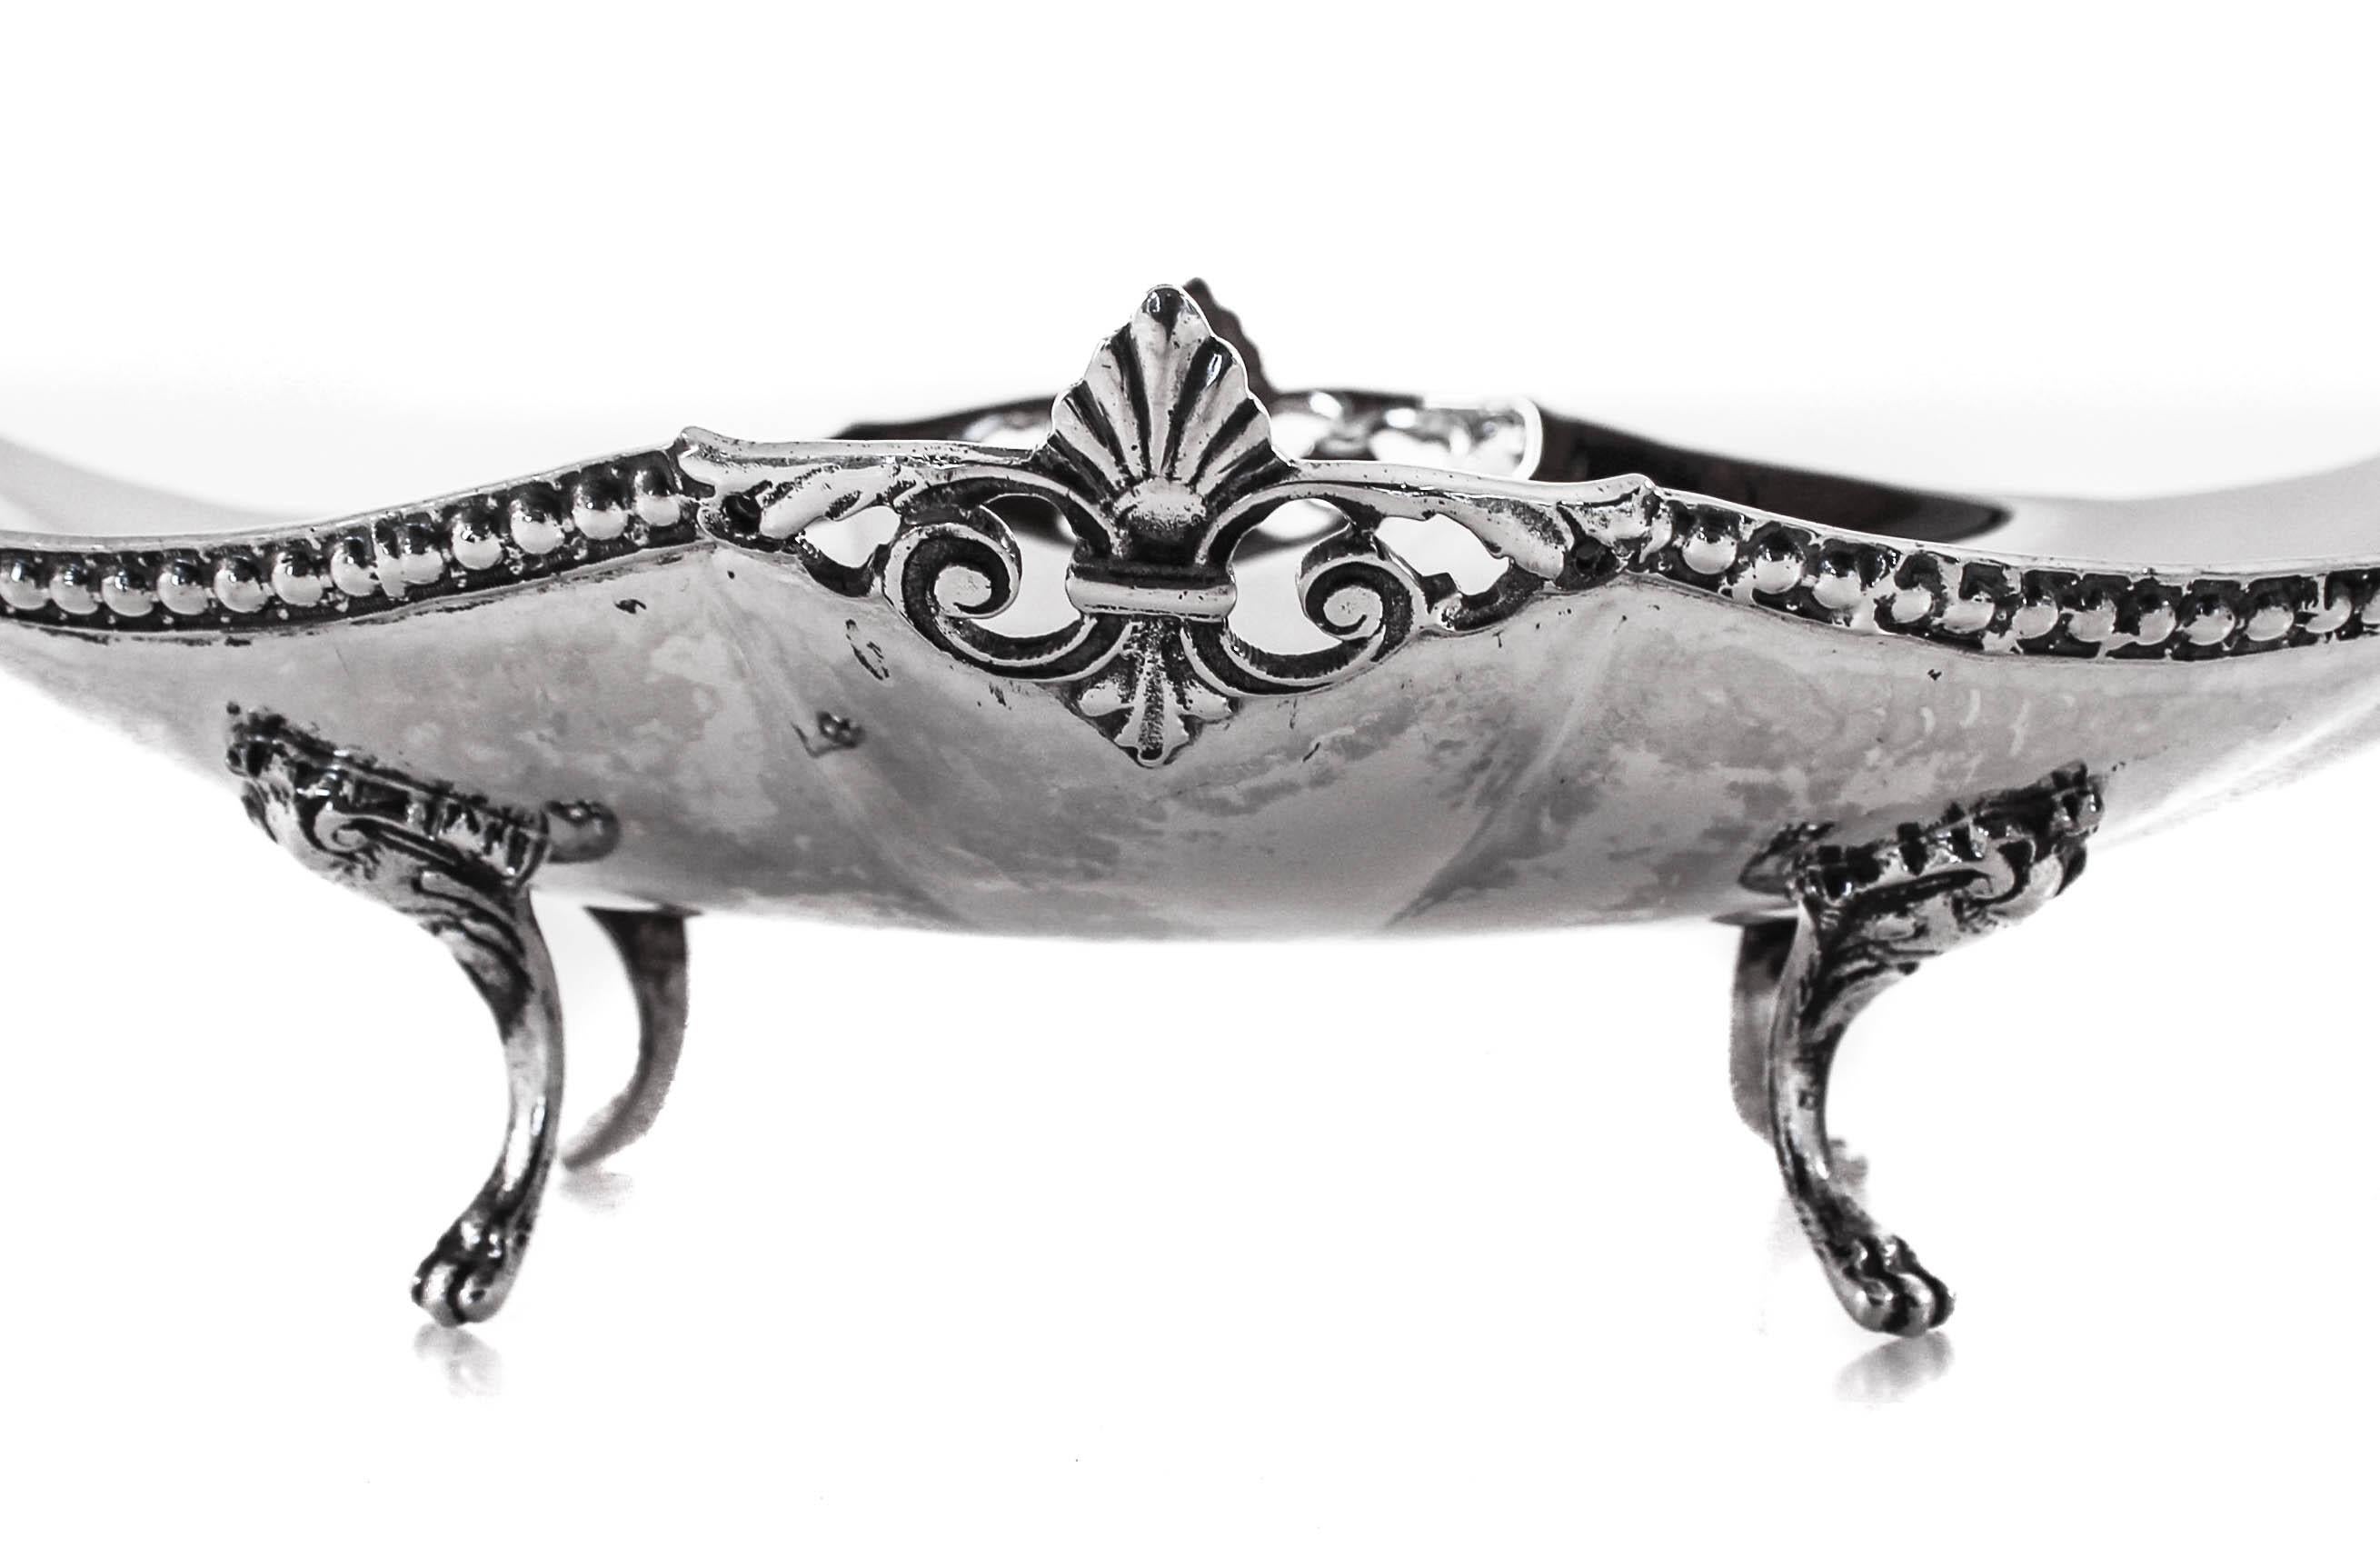 Standing on four claws, this oval sterling silver dish is lifted off the surface. On opposite ends a curler handle makes it easy to carry and pass around. The inside is clean and without ornamentation however along the outside rim there is a